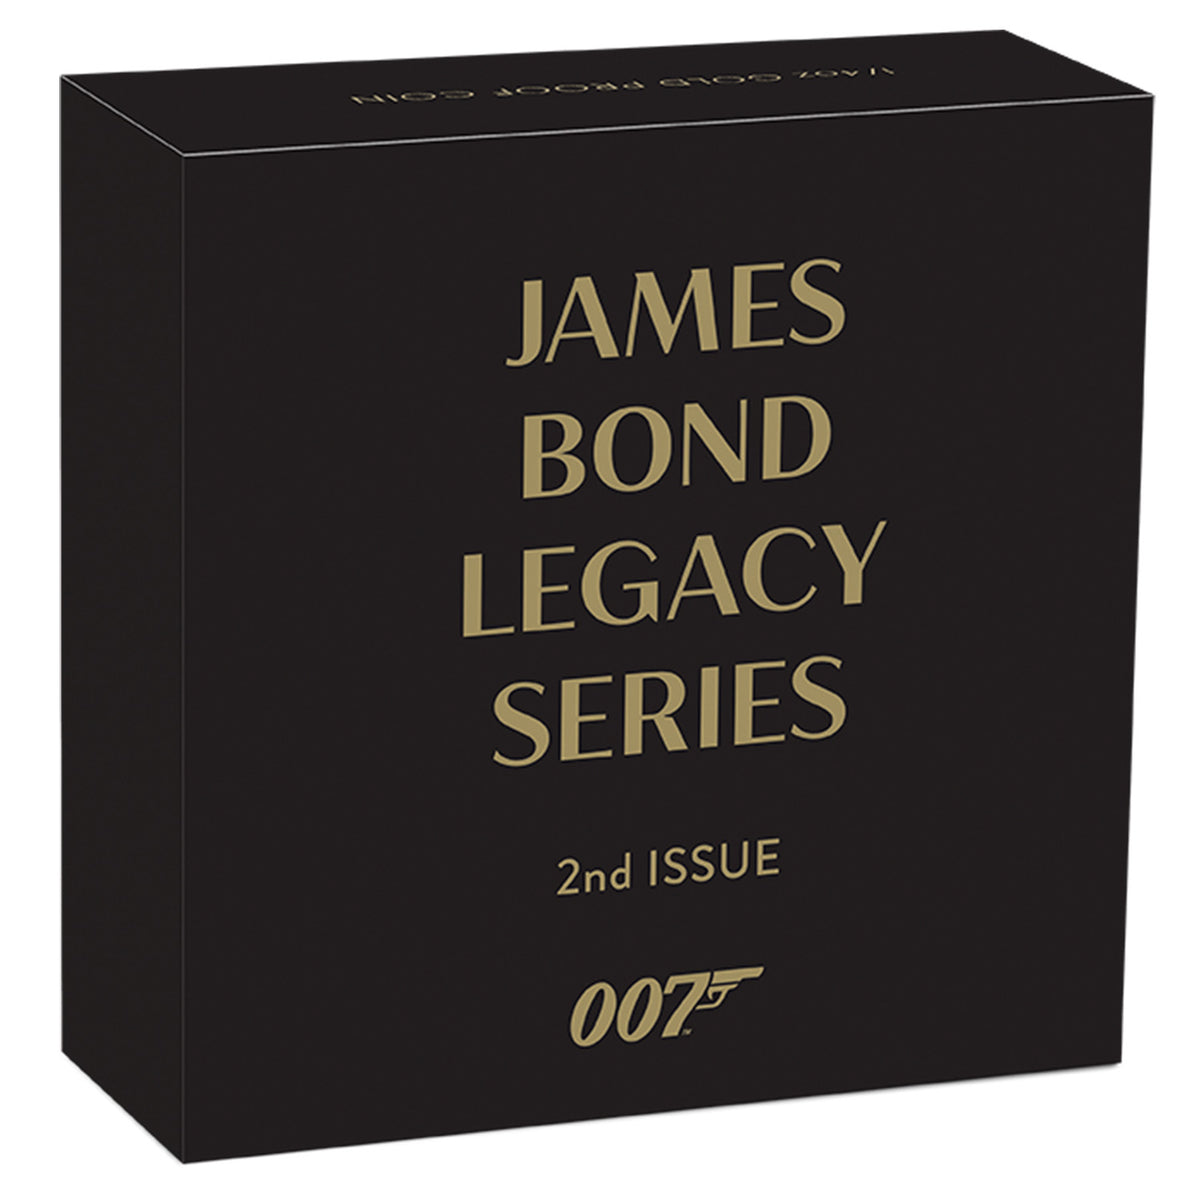 James Bond Roger Moore 1/4oz Gold Proof Coloured Coin - Numbered Edition - By The Perth Mint